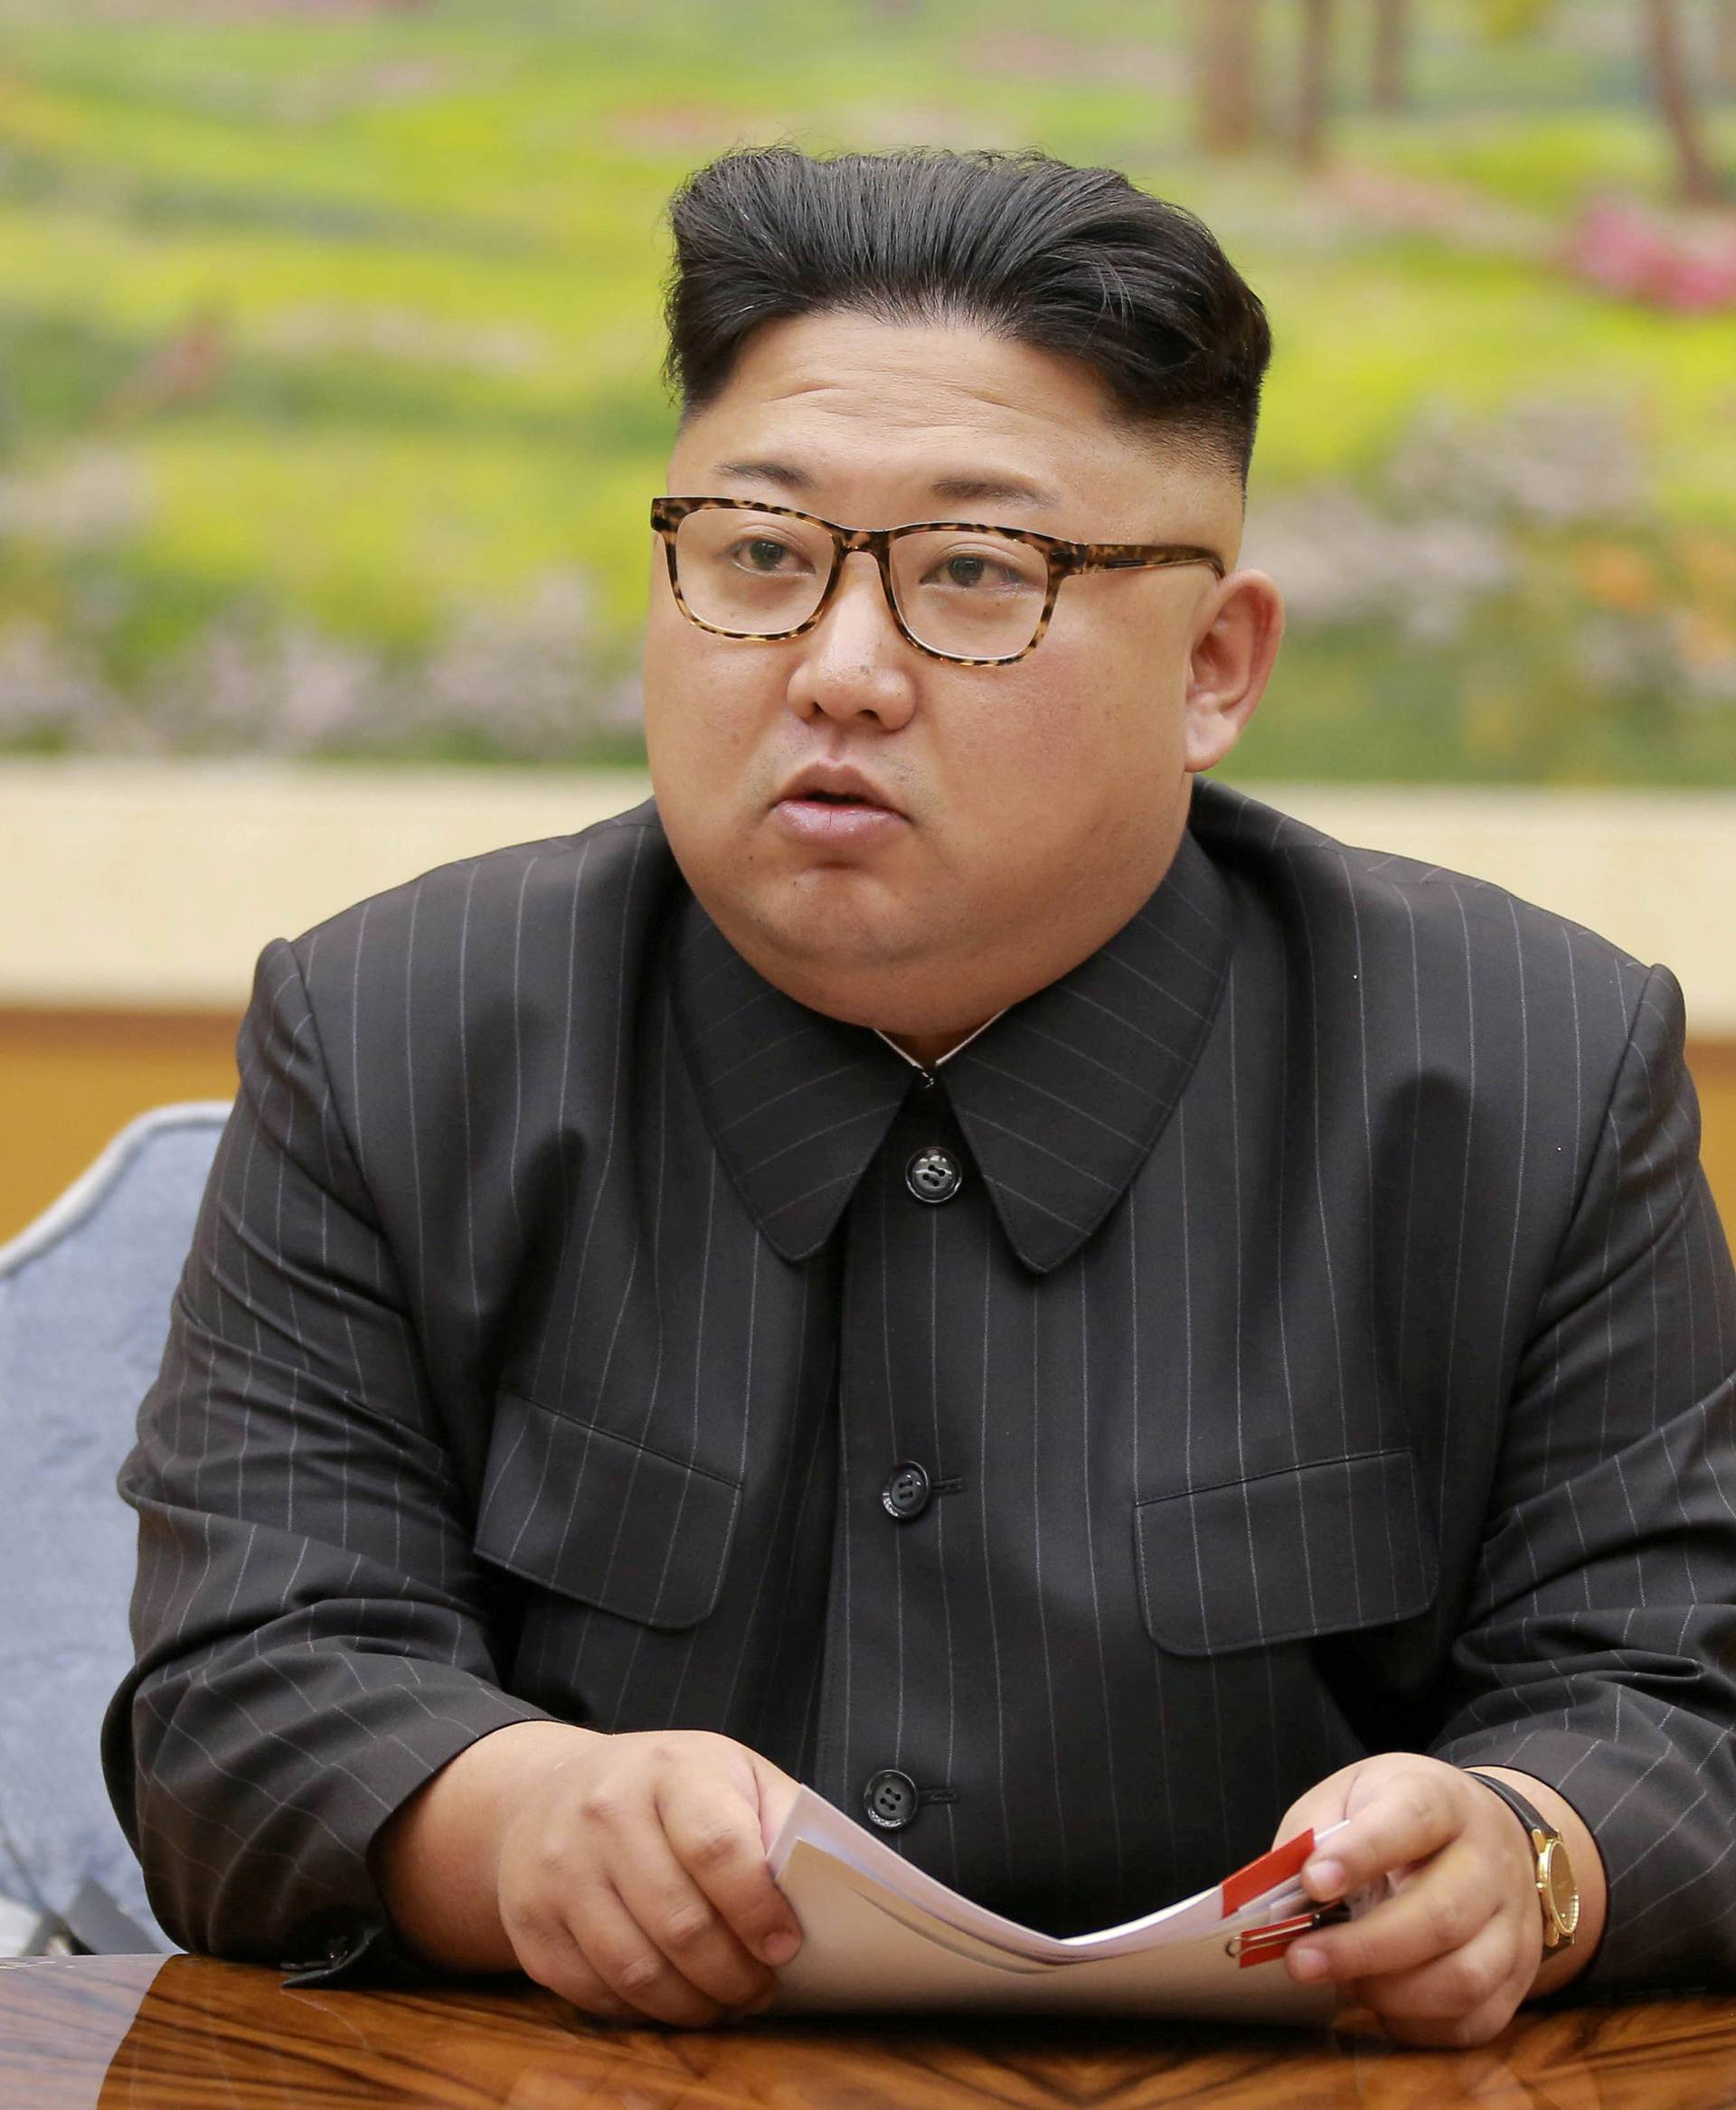 FILE PHOTO: North Korean leader Kim Jong Un participates in a meeting with the Presidium of the Political Bureau of the Central Committee of the WorkersÃ Party of Korea